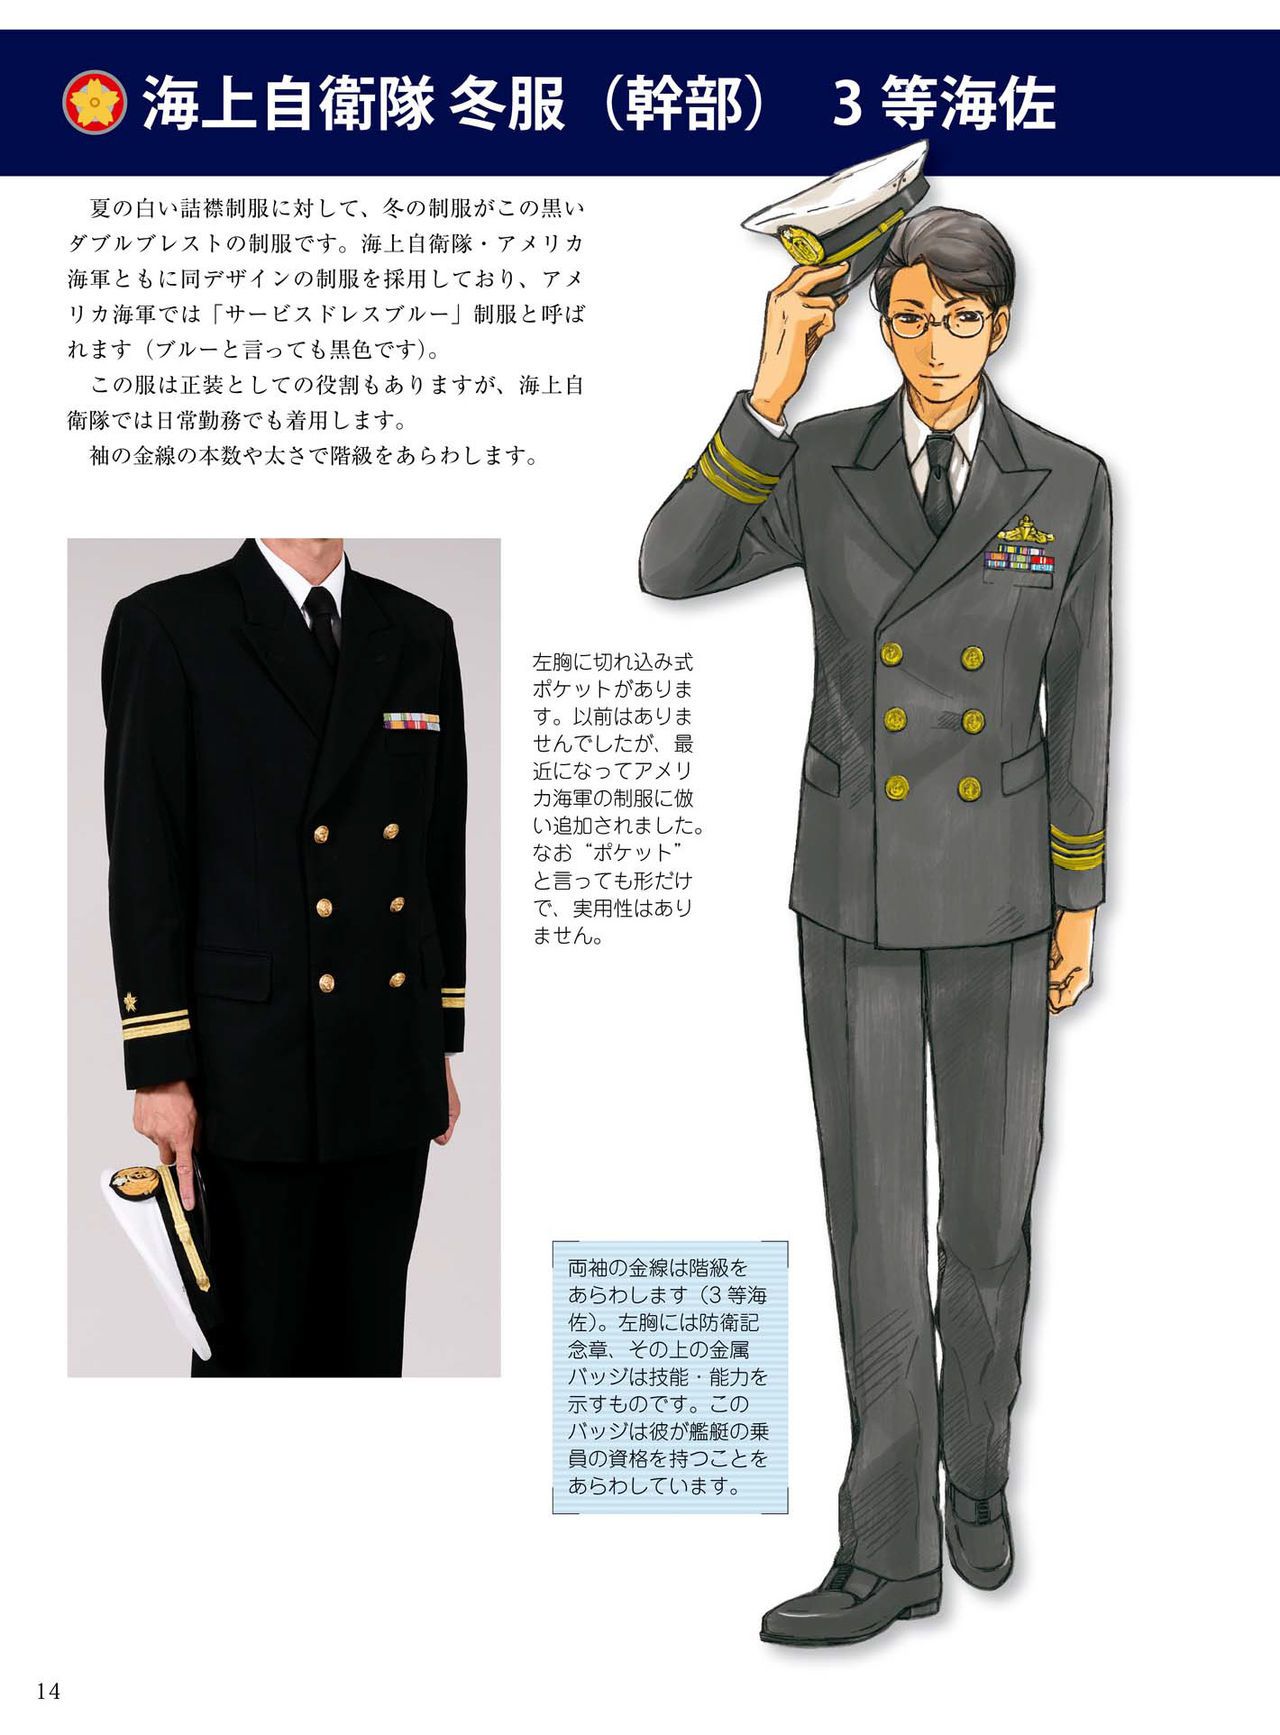 How to draw military uniforms and uniforms From Self-Defense Forces 軍服・制服の描き方 アメリカ軍・自衛隊の制服から戦闘服まで 17